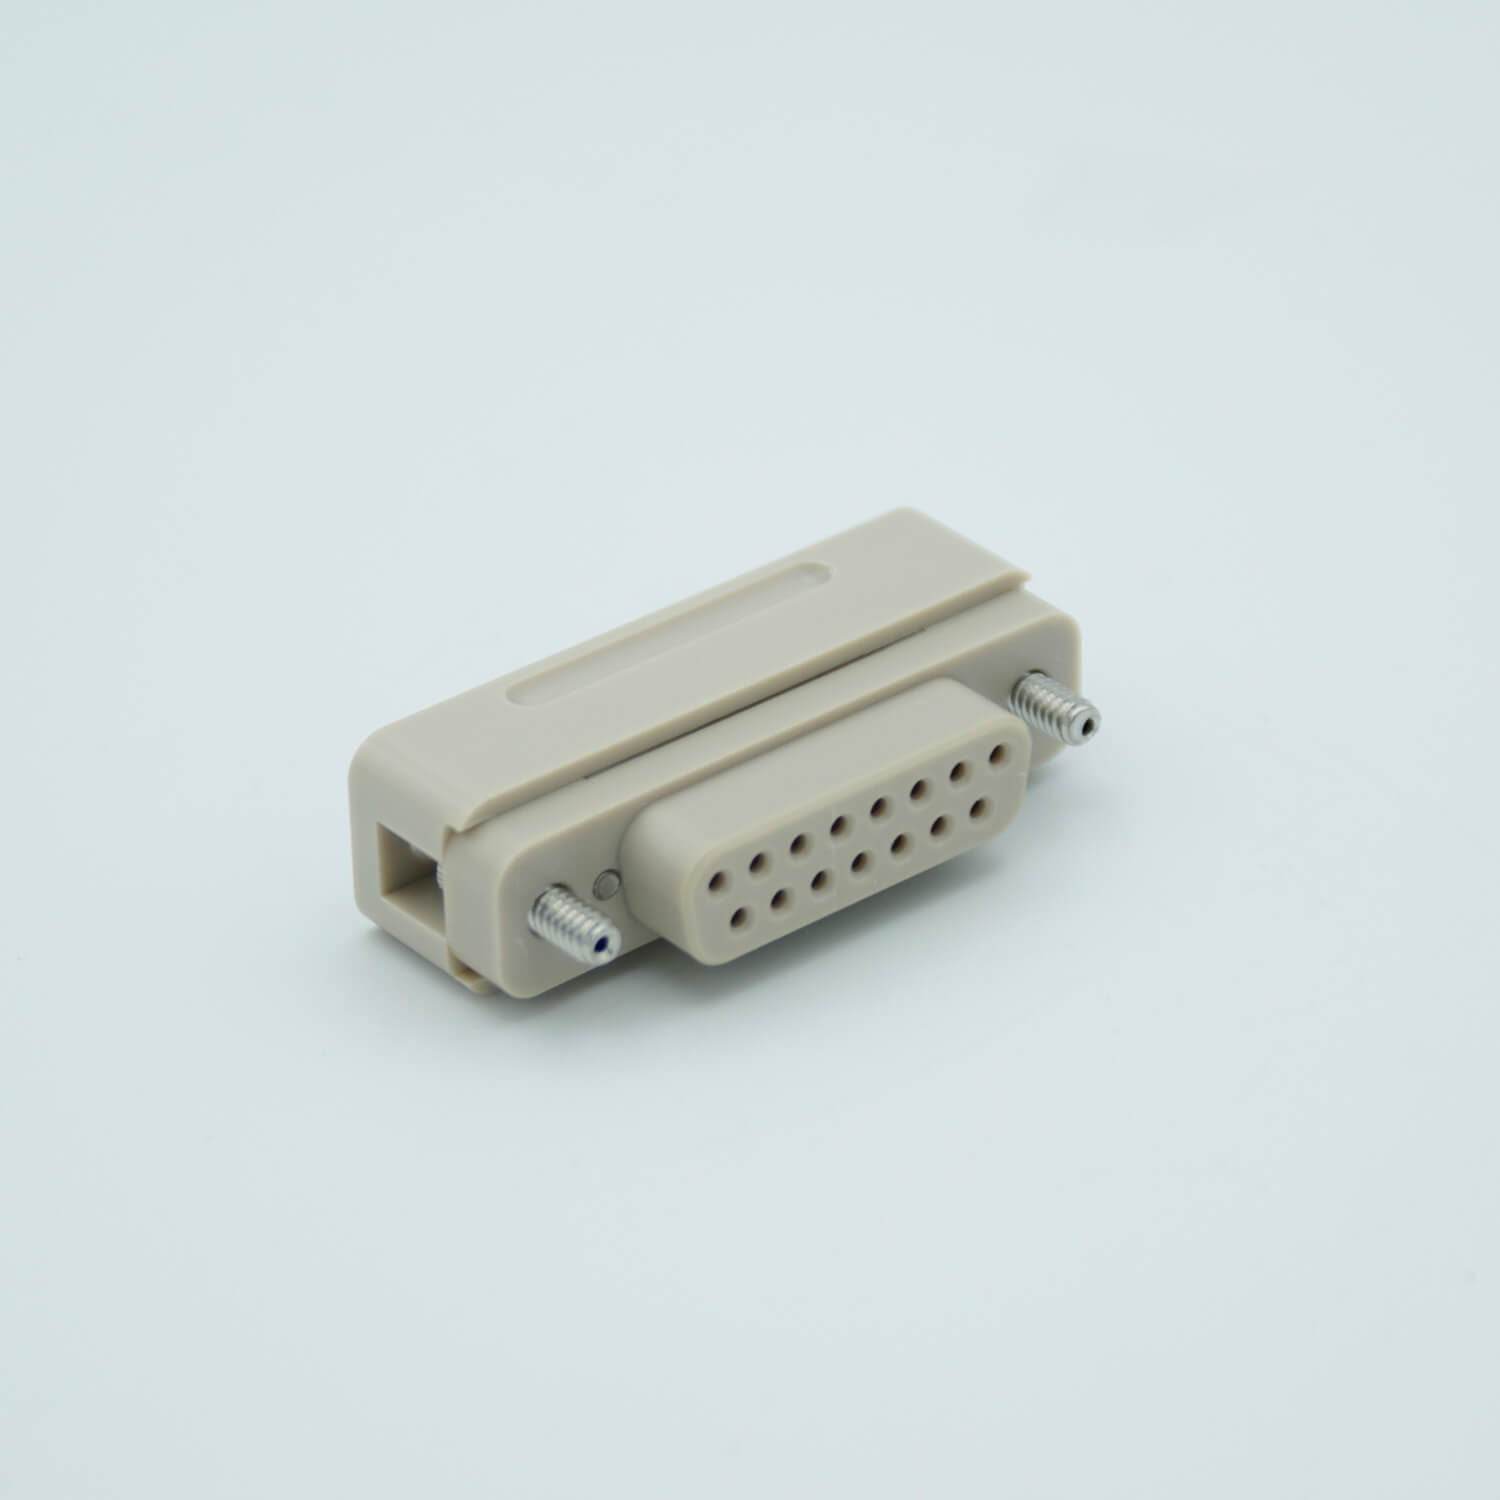 25 Пиновый разъем для NC-210. Multipin Flexboard Connector. Type d Connector 3d model. Remote connection 15 Pin.